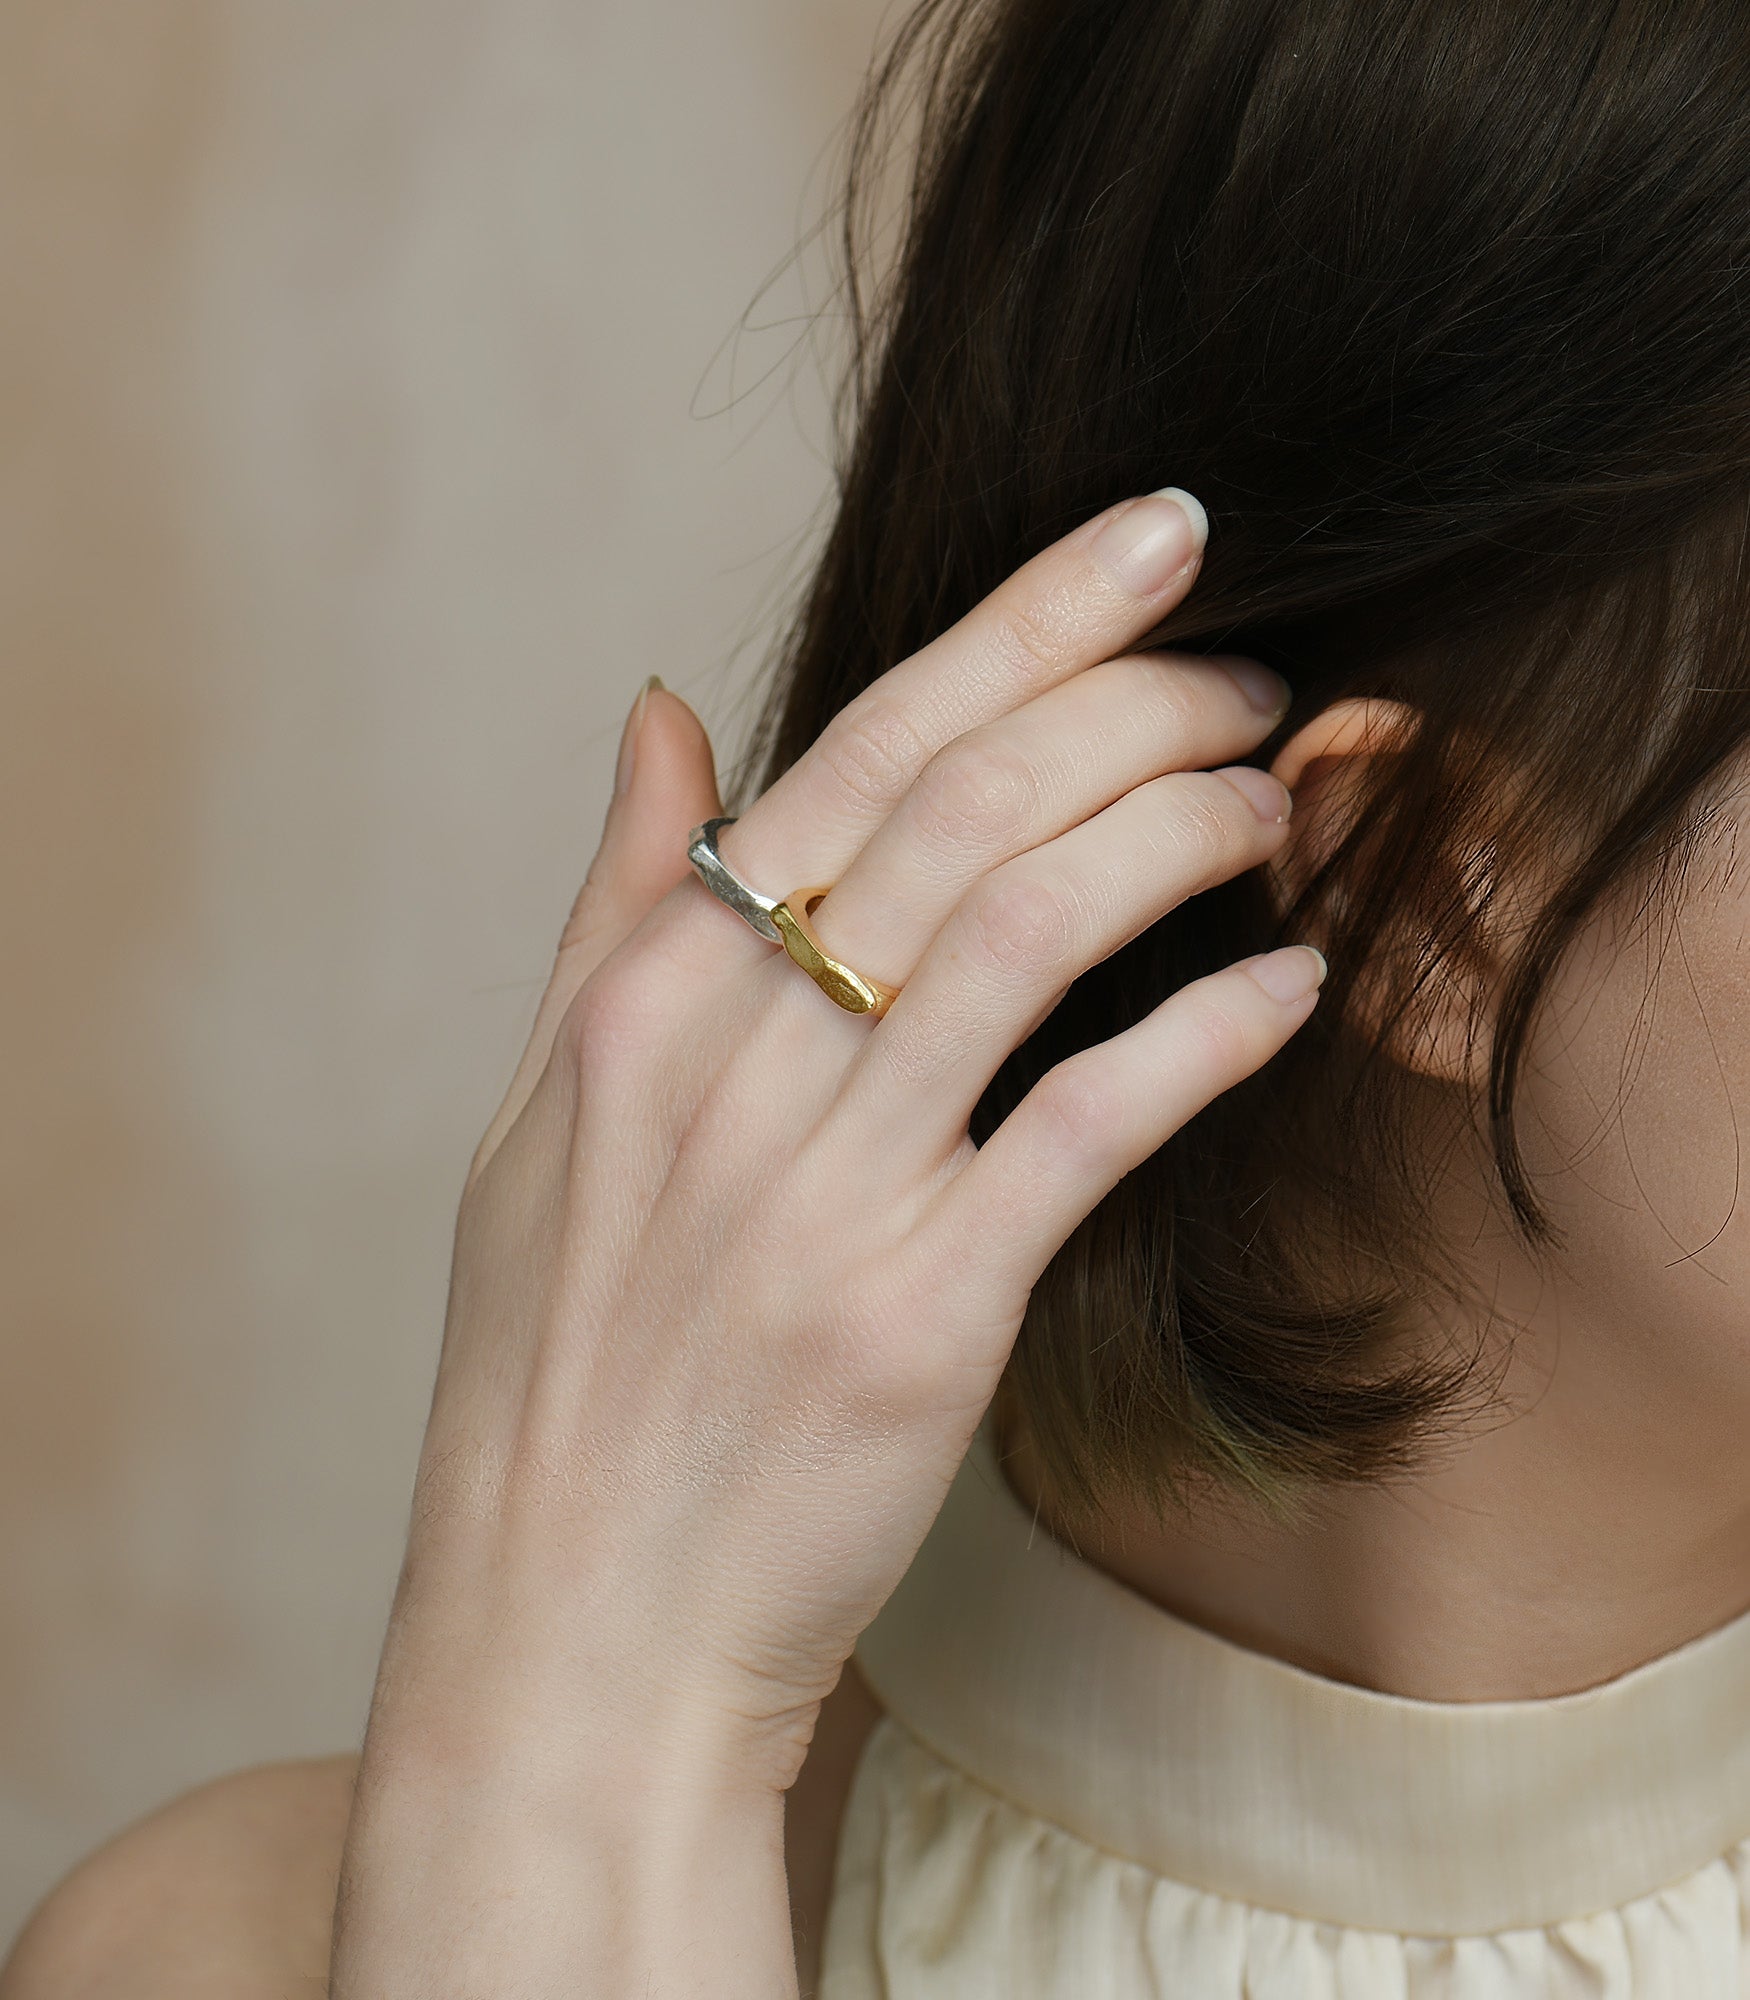 A model wears a sterling silver and a gold vermeil ring. Both rings have a chunky band and organic texture.